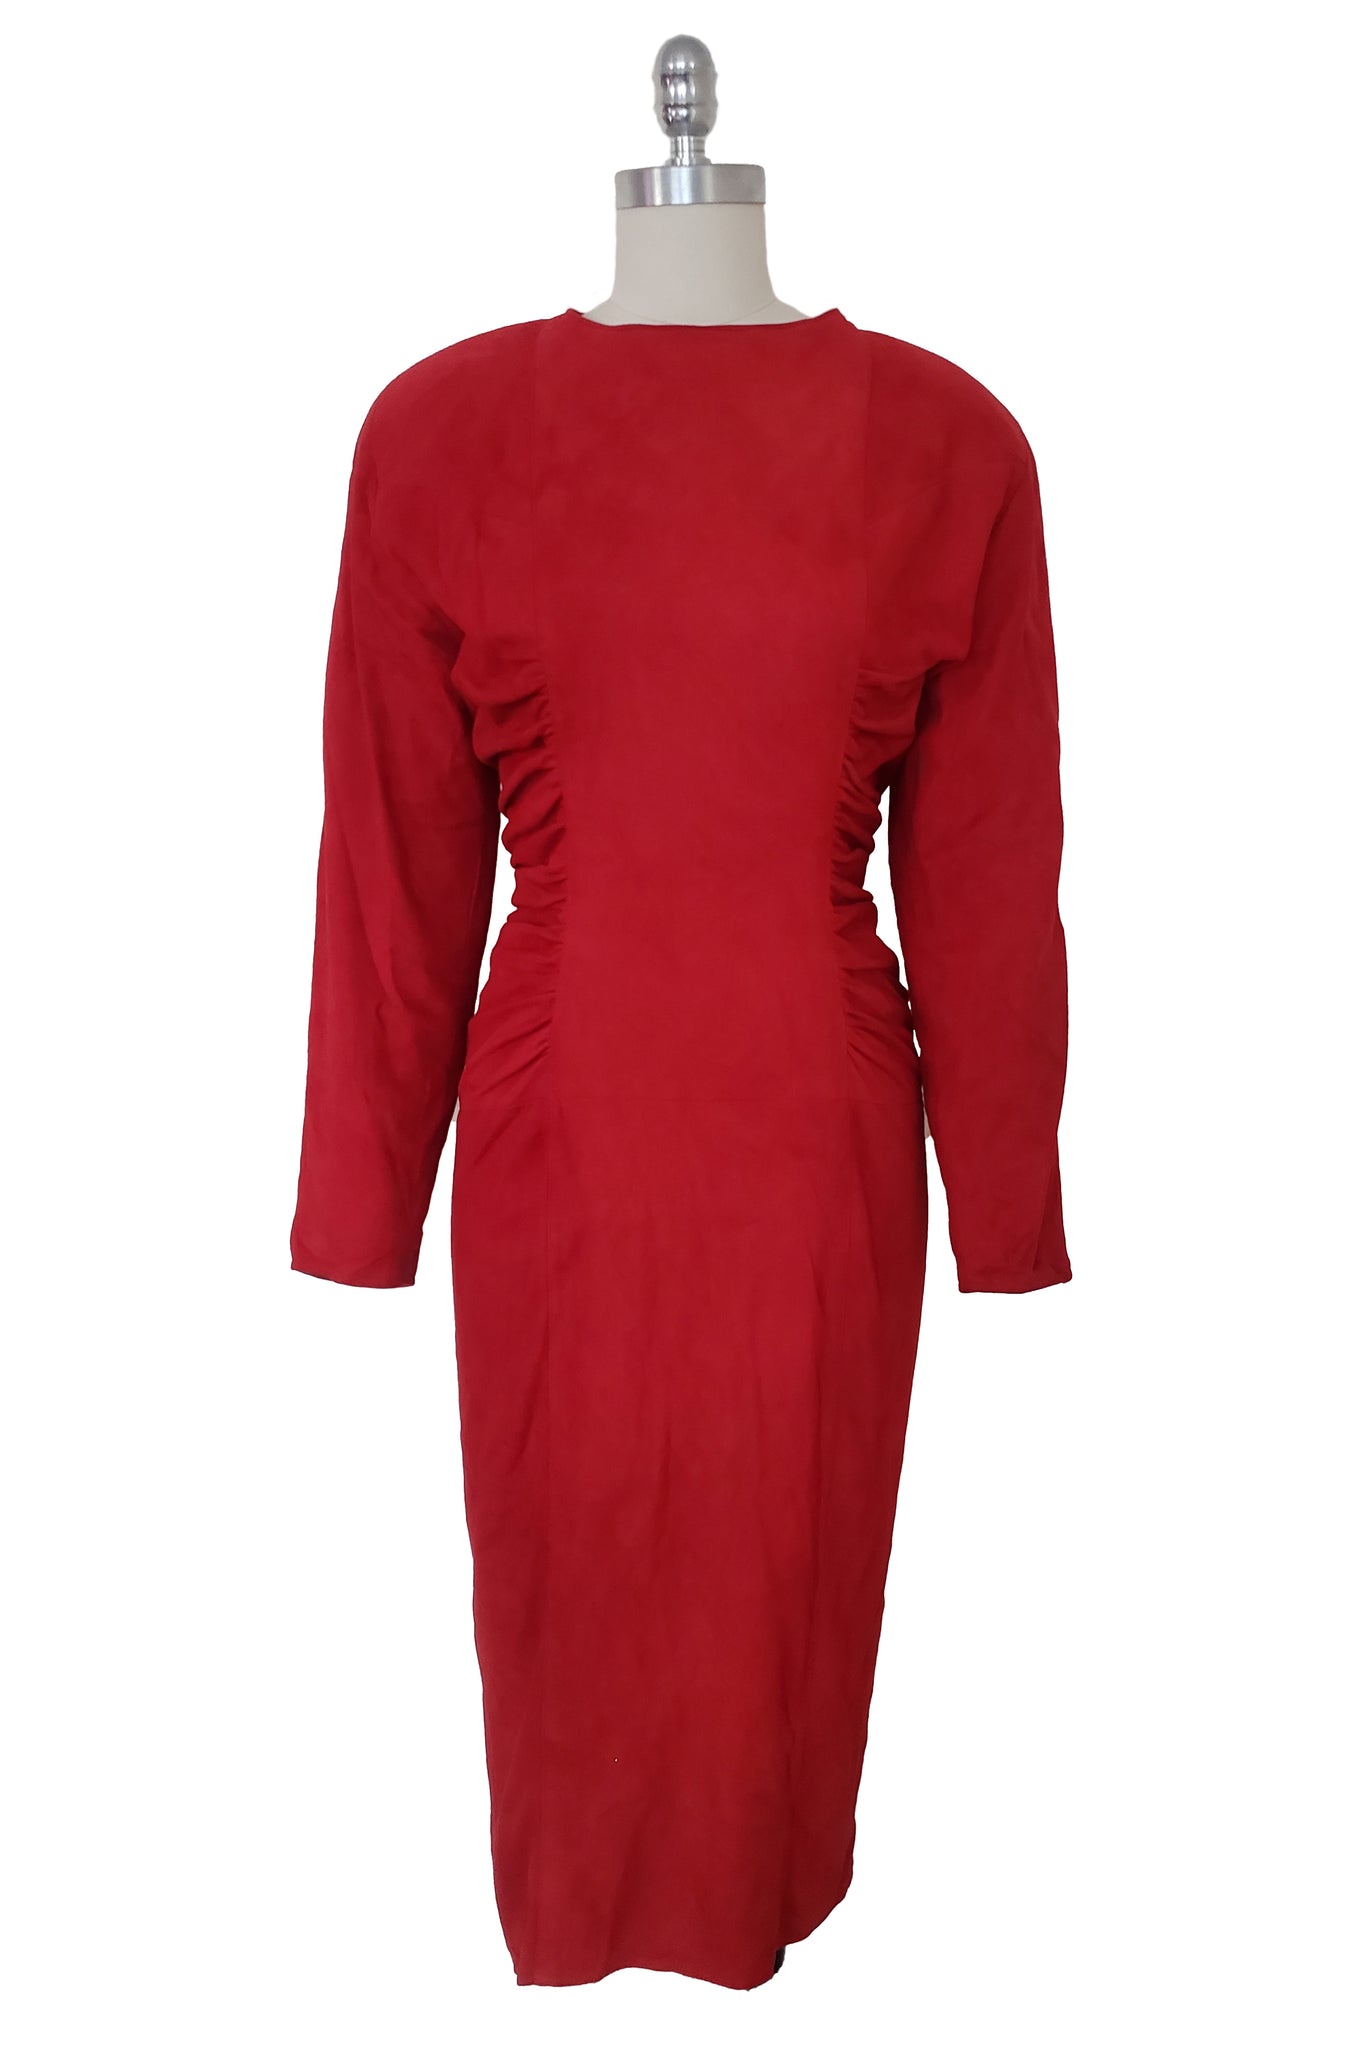 1980s Vintage Crimson Red Suede Leather Dress by Vakko, Small to Medium